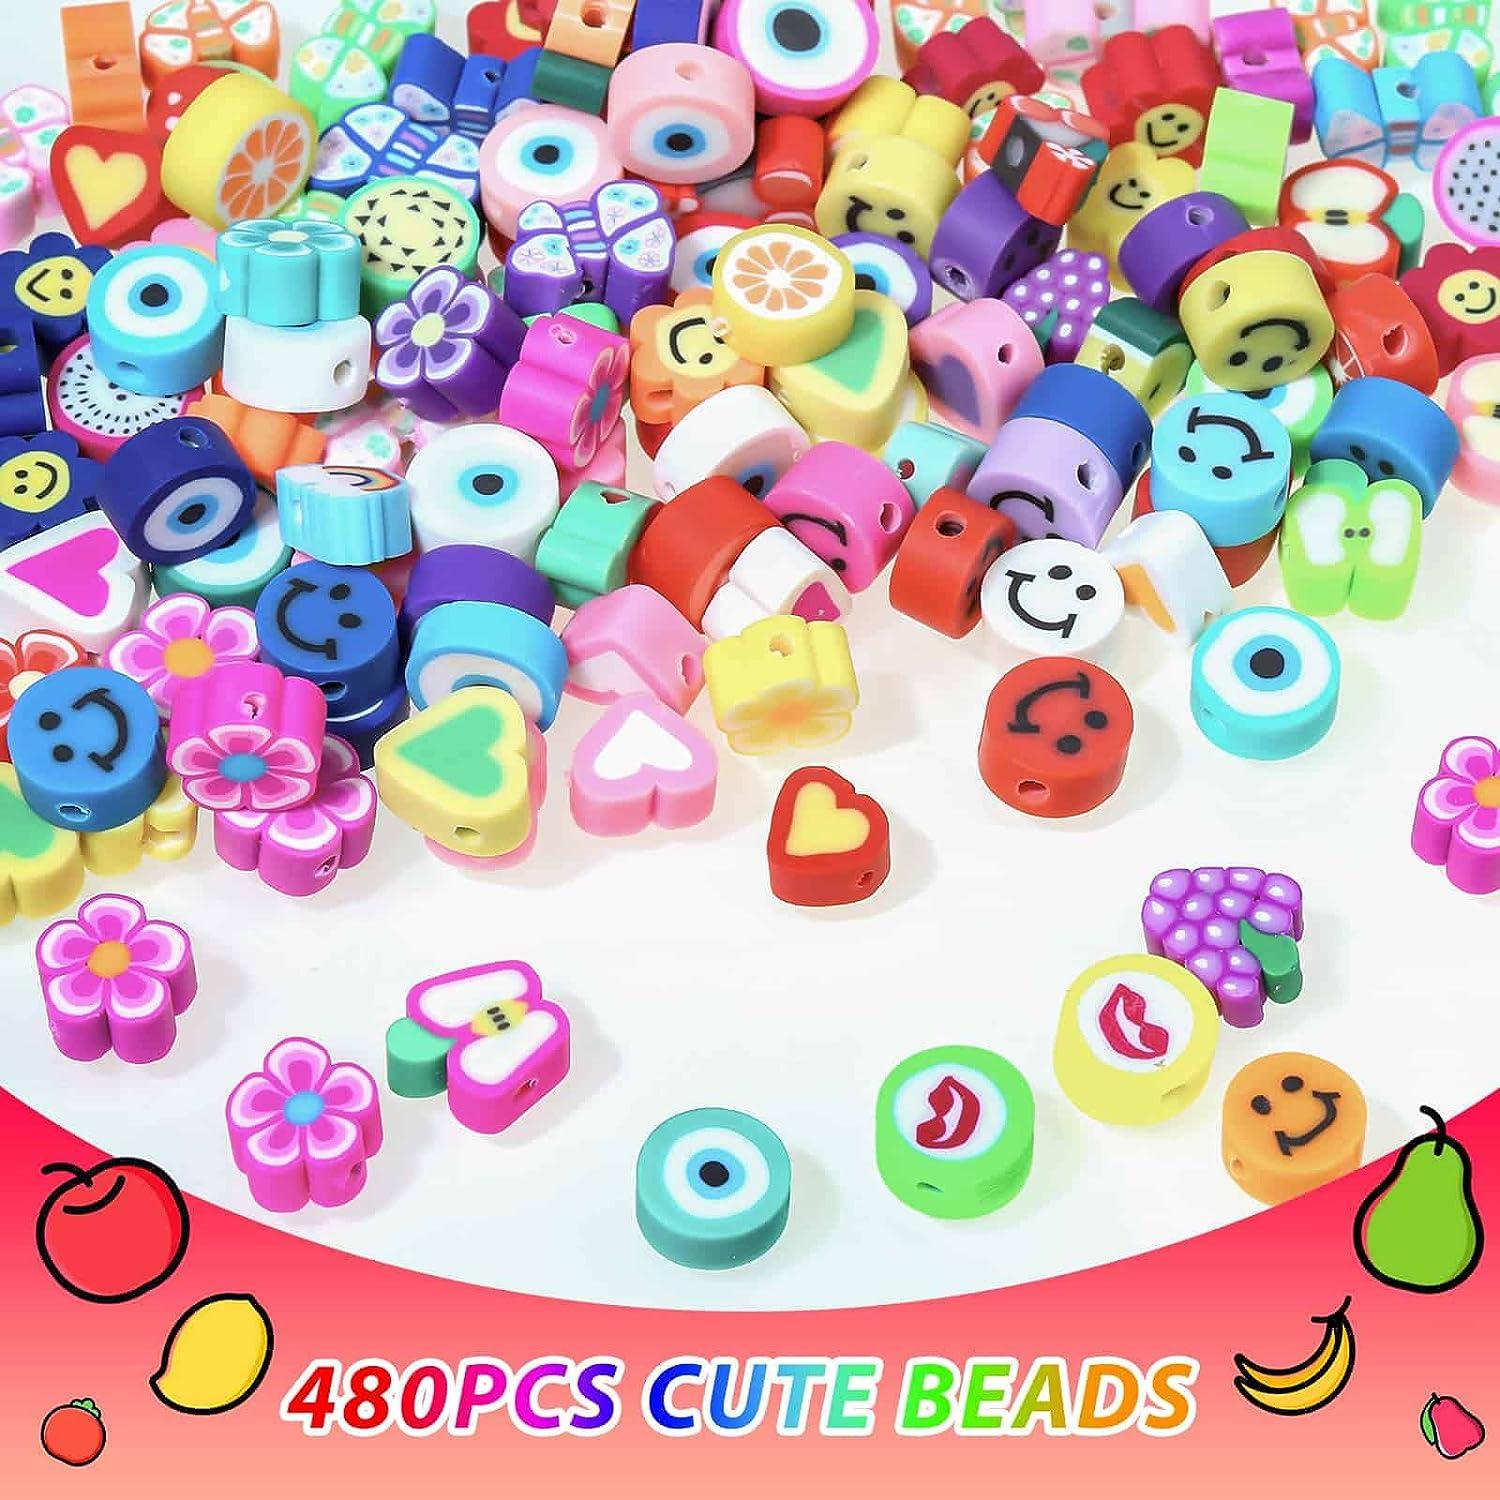 480 Pcs Fruit Flower Polymer Clay Beads, 24 Styles Trendy Cute Smiley Bead  Charms for Bracelets Jewelry Necklace Earring Making with Elastic String